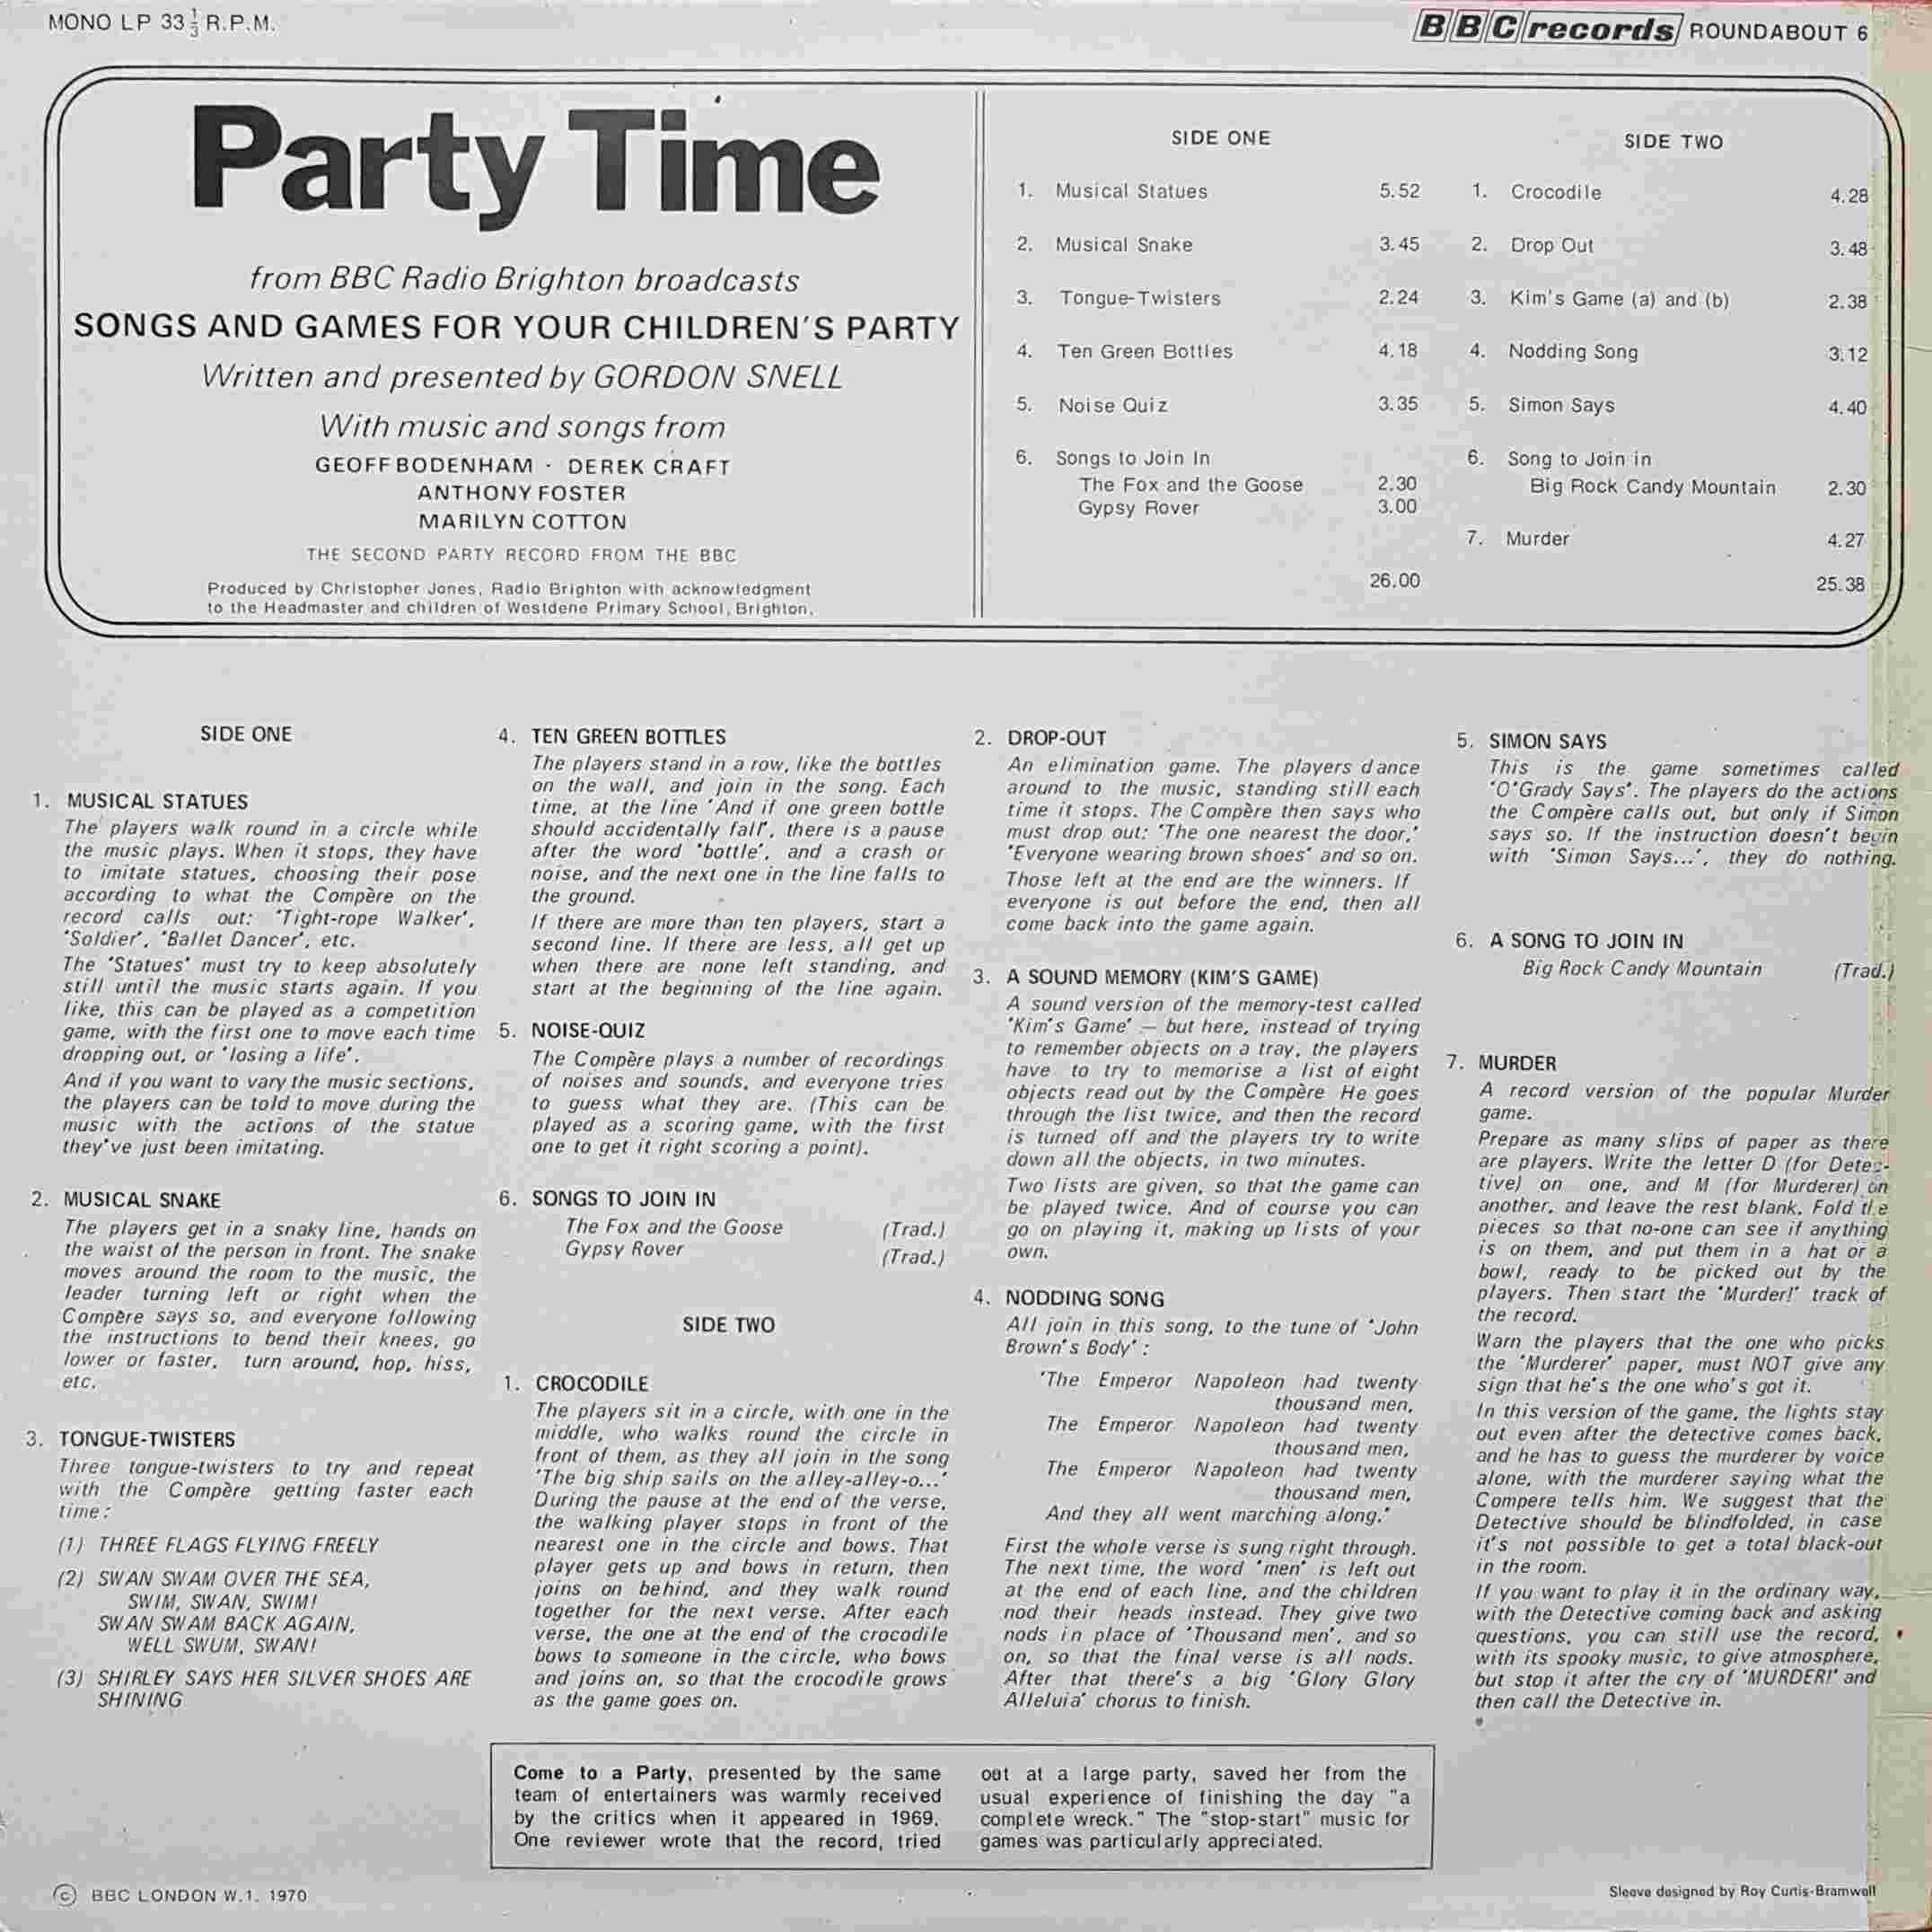 Picture of RBT 6 Party time by artist Gordon Snell from the BBC records and Tapes library